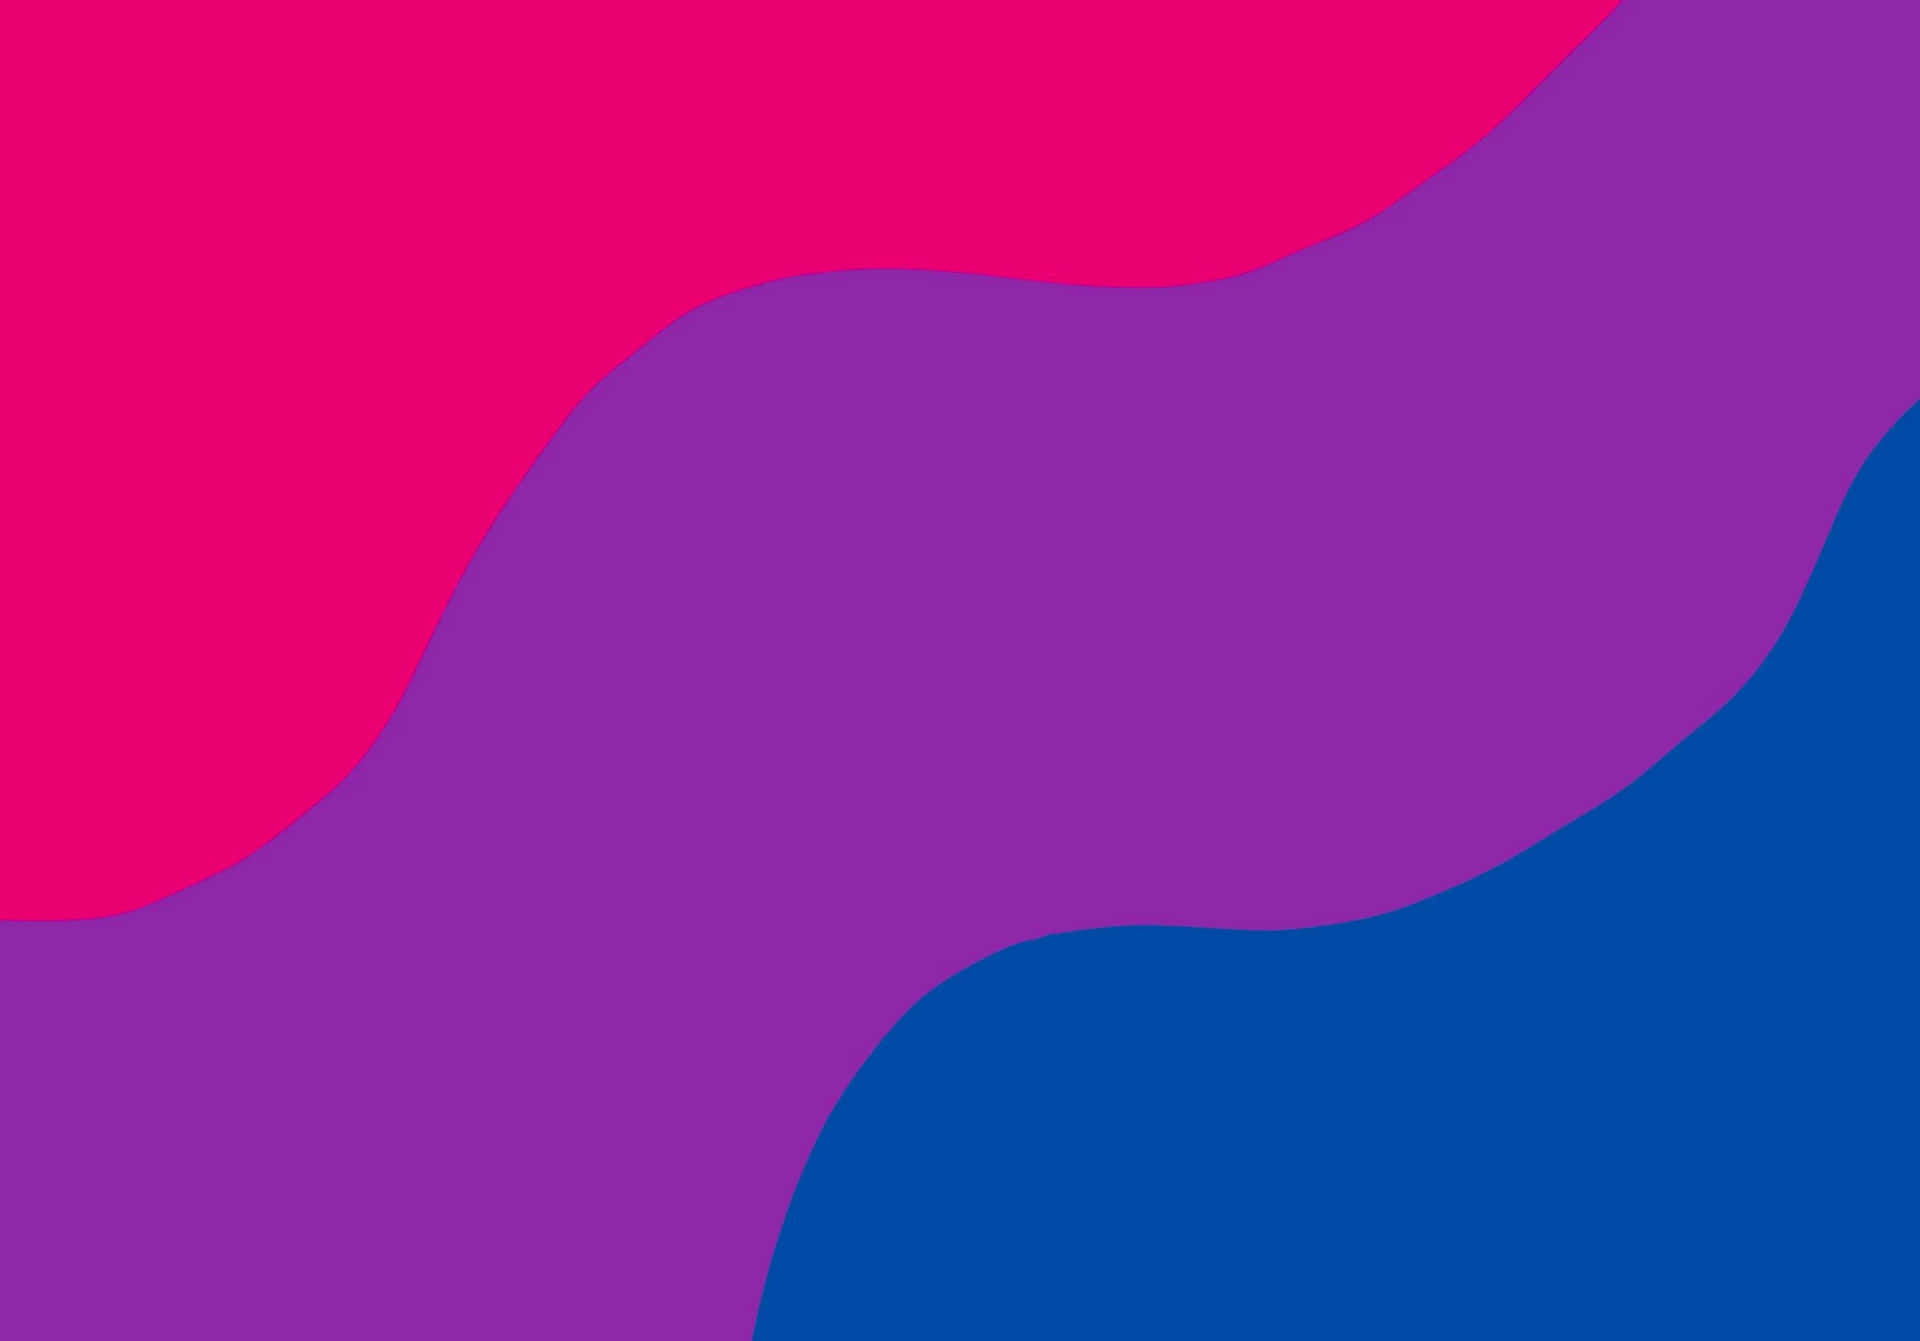 A Purple, Blue And Pink Background With A Wave